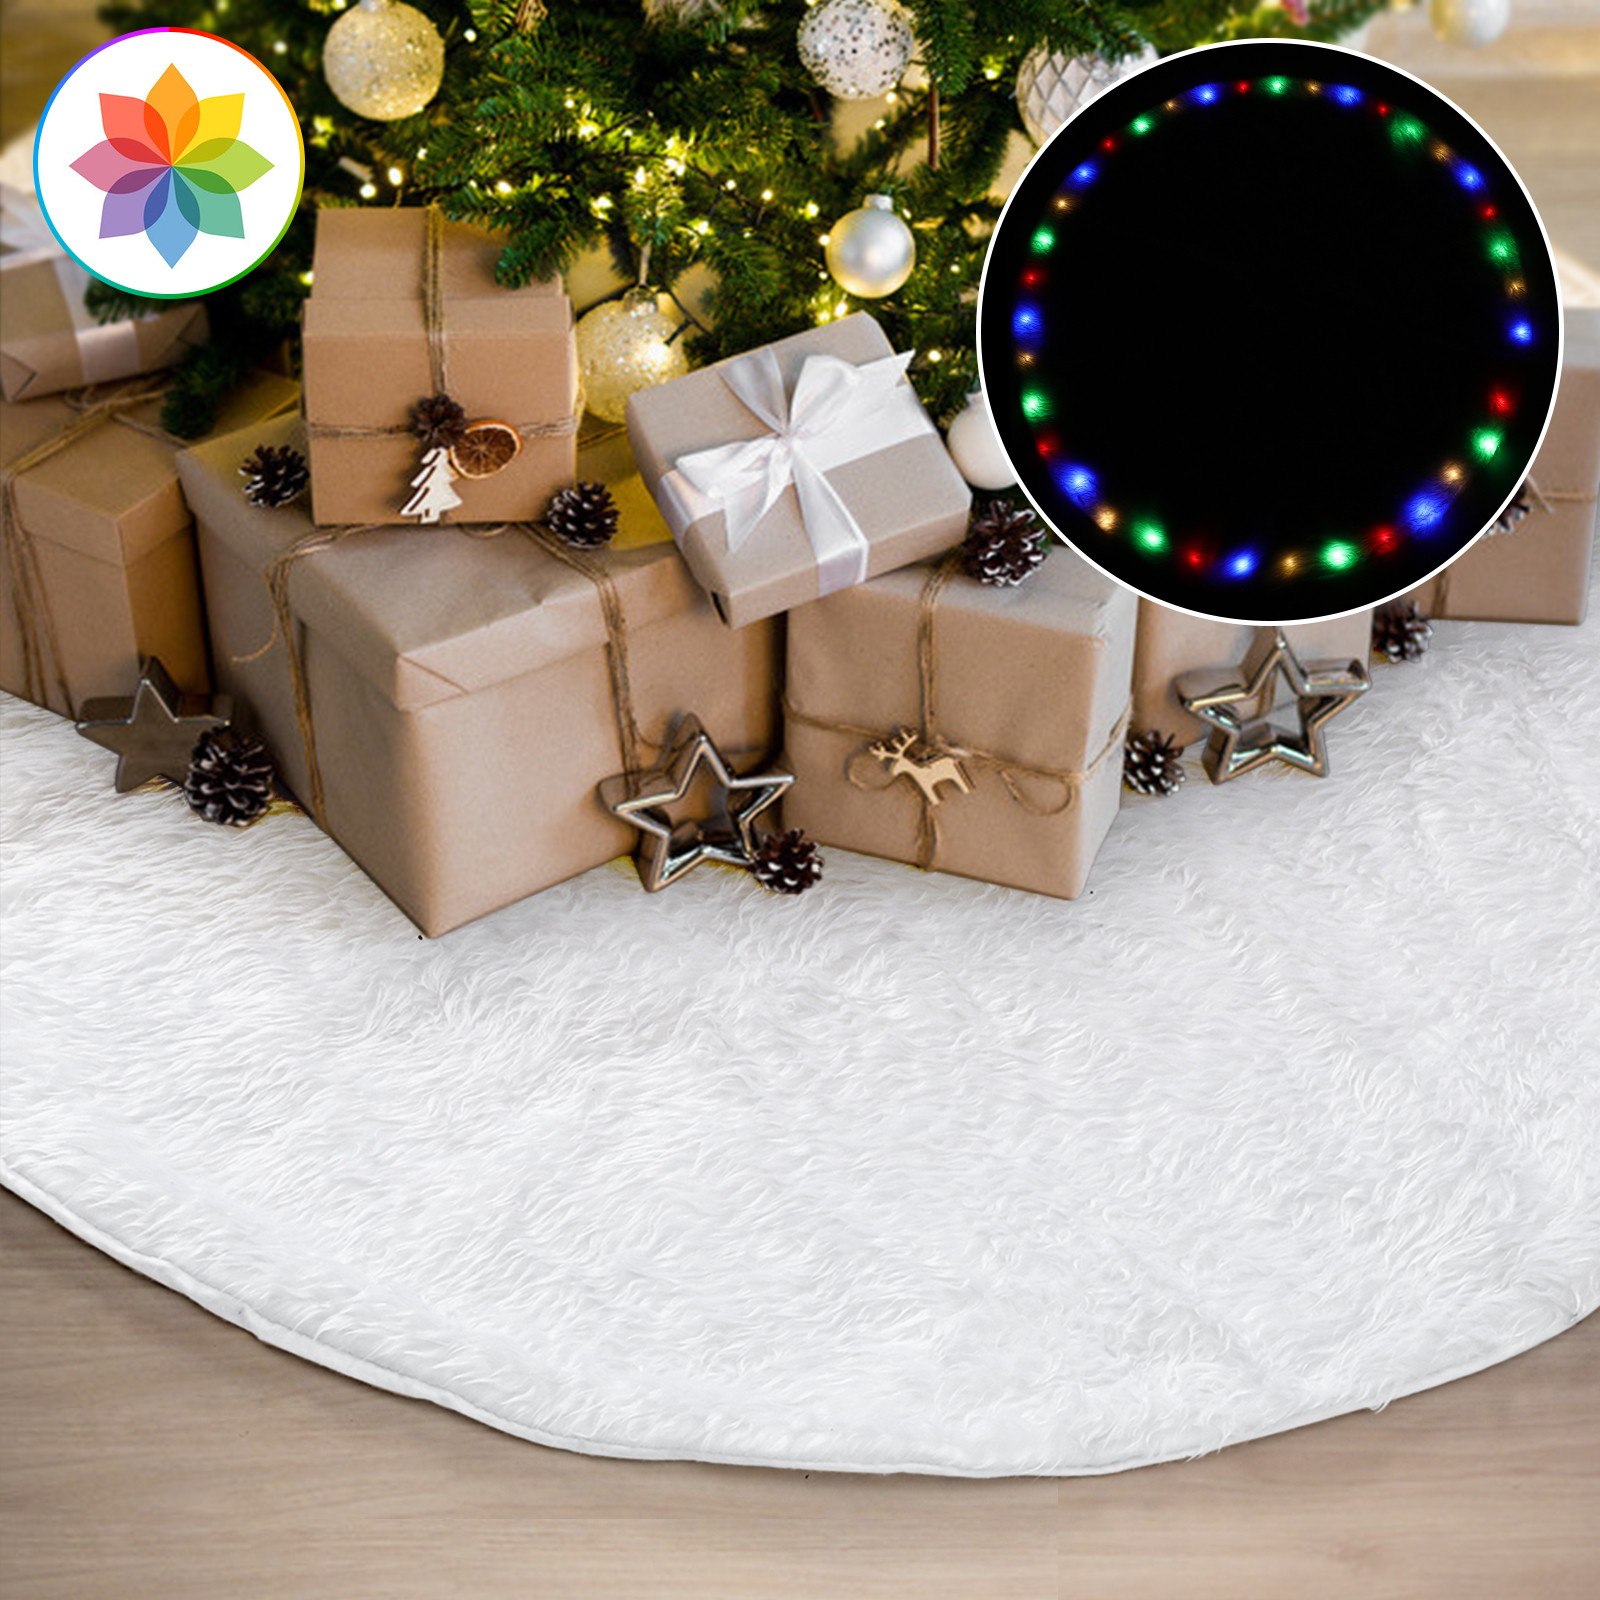 AMBOTHER 36 LED Christmas Tree Skirts 48-inch Battery Operated RGB Round Tree Skirt Christmas Decoration with Plush for Christmas Tree Indoor Outdoor Holiday Party